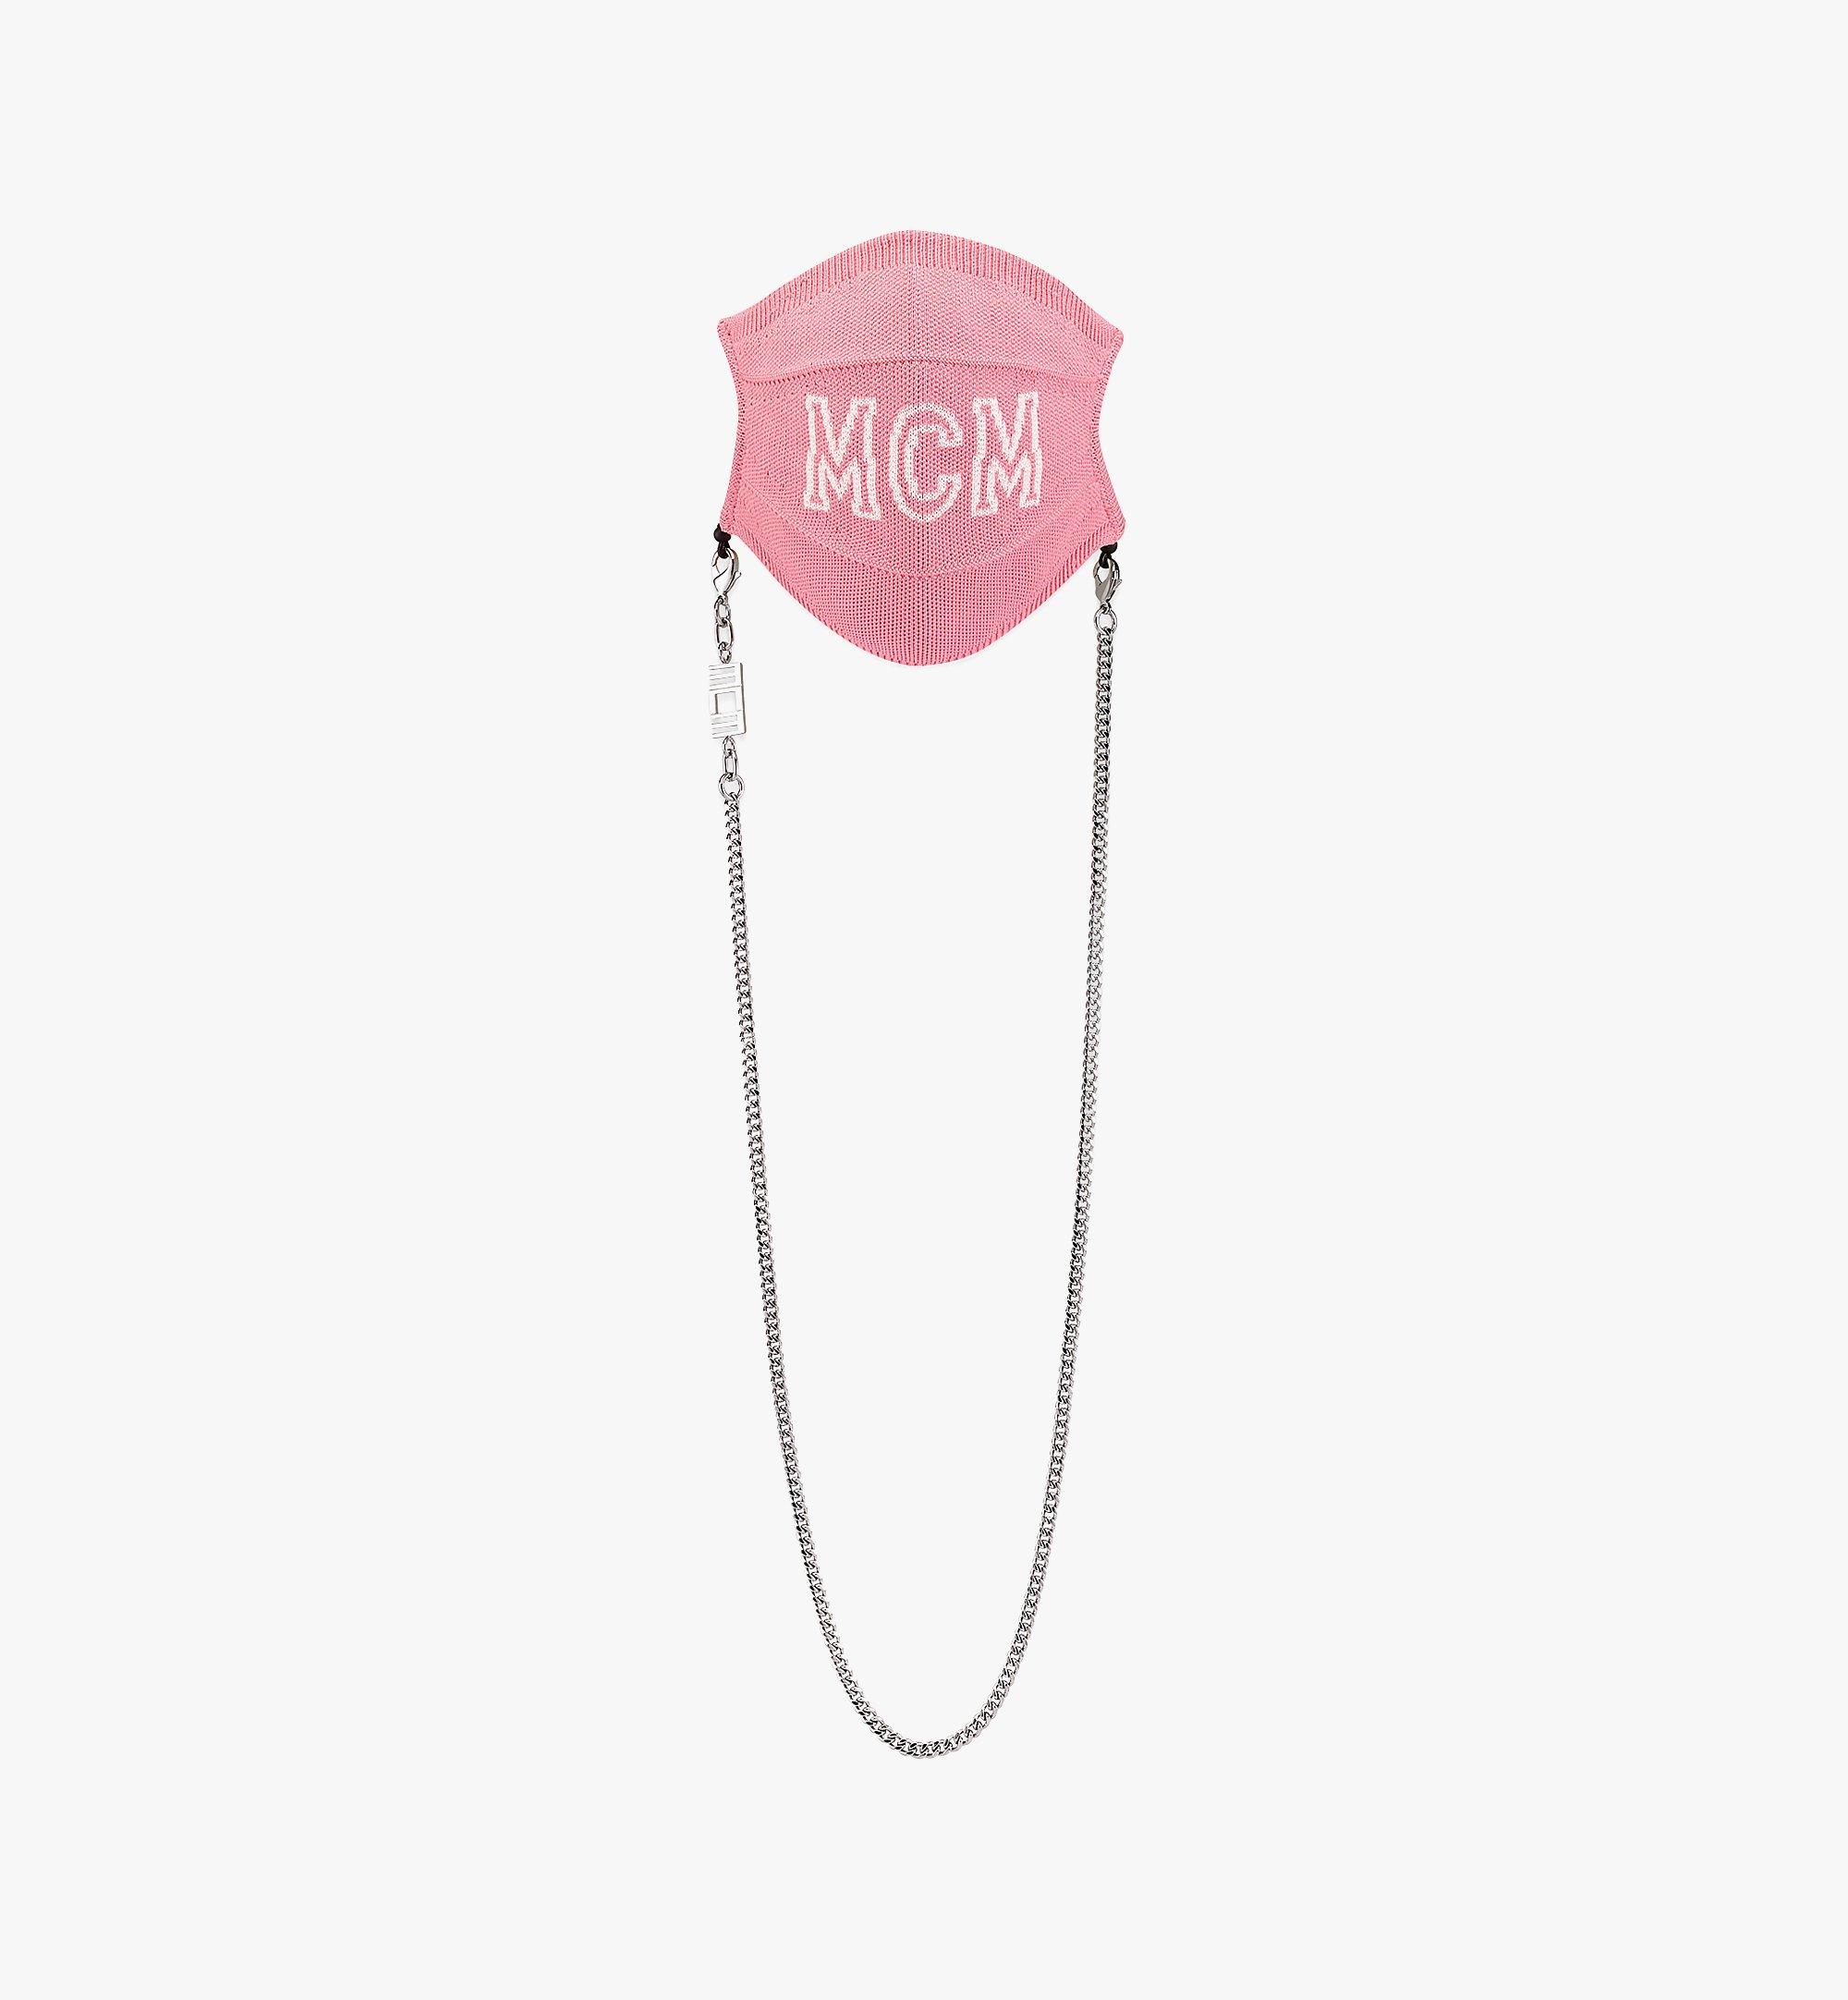 MCM Logo Knit Face Accessory with Chain  MEZBSMM11PK001 Alternate View 1